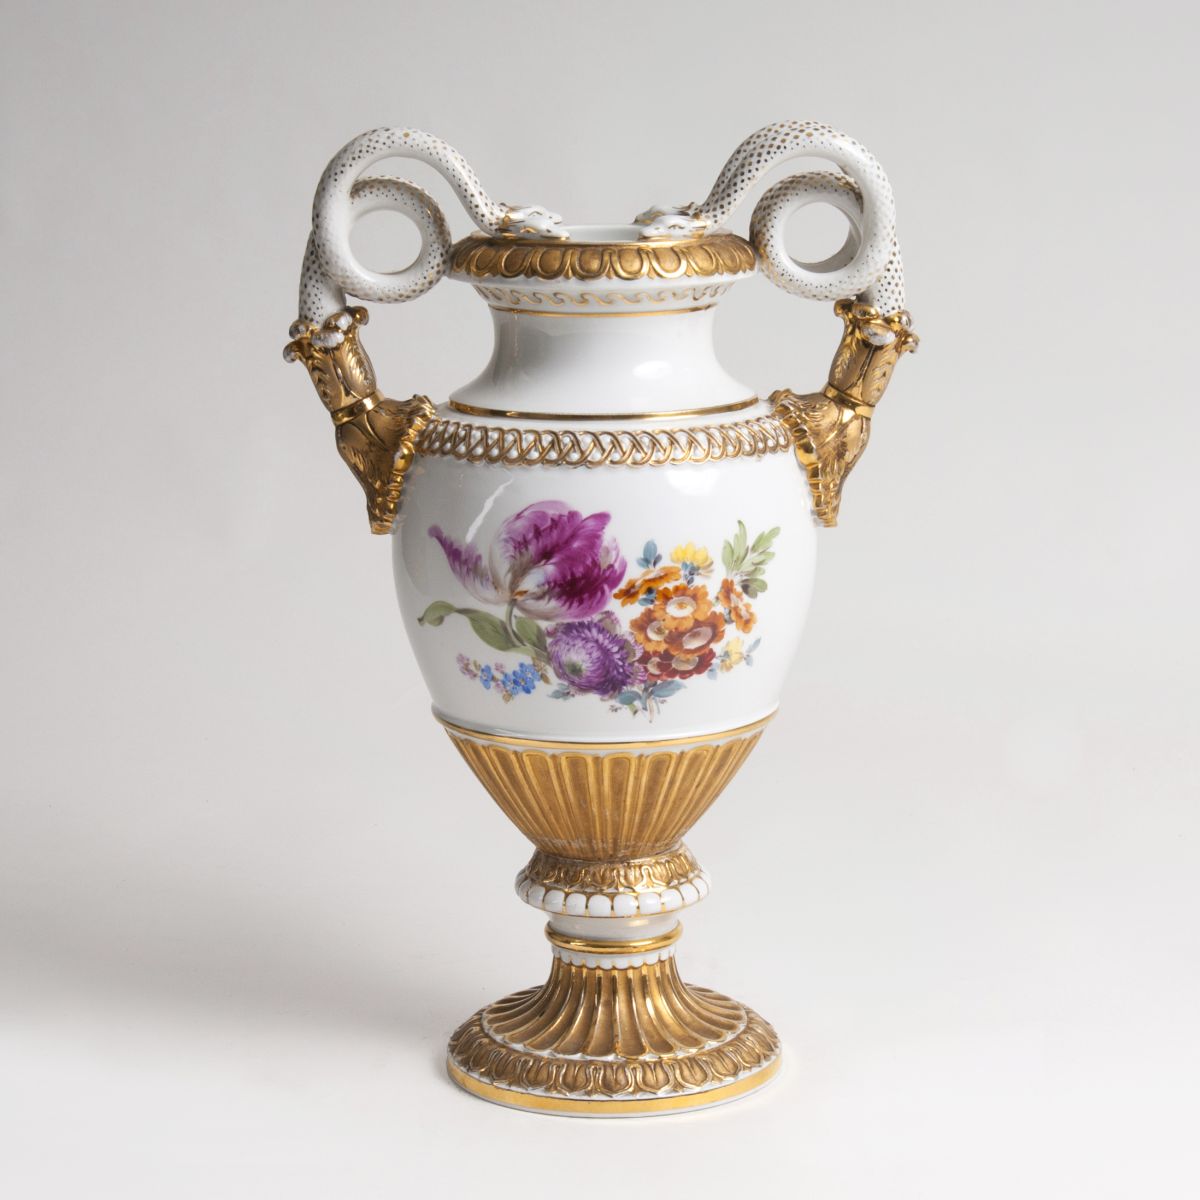 A Porcelain Vase with Snake Handles and Flower Painting